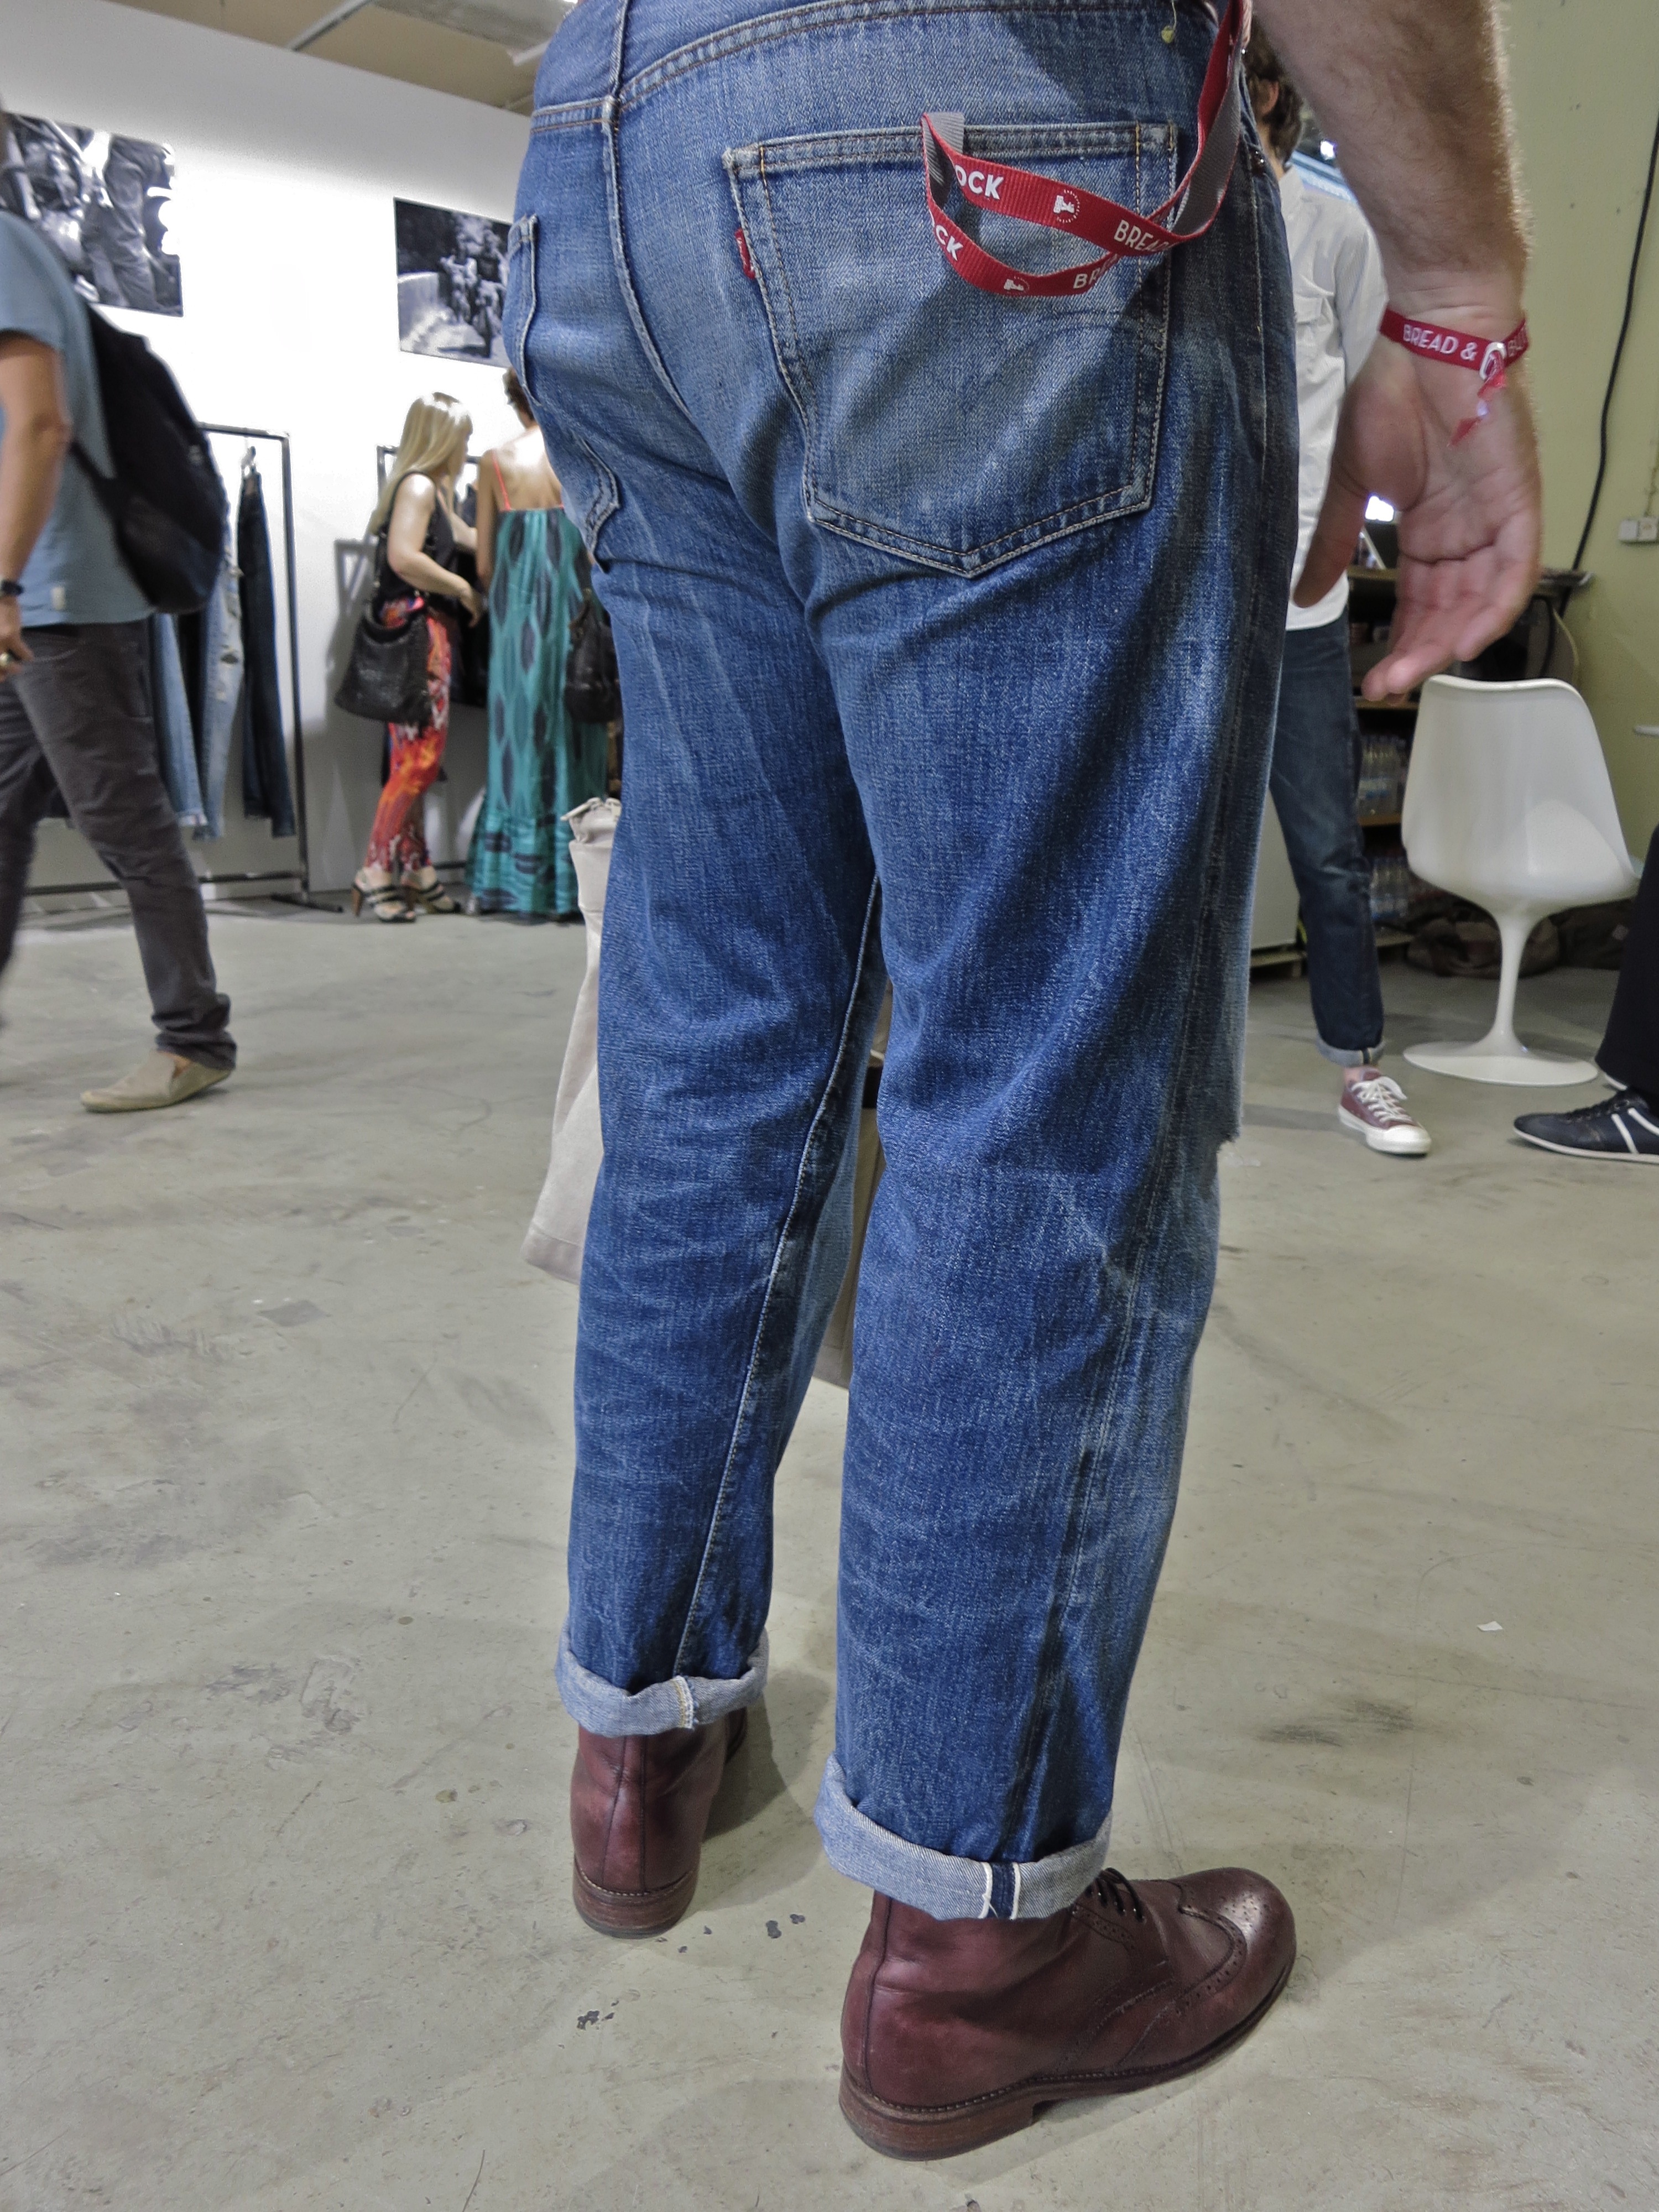 Authentically Worn In Jeans at Bread & Butter - Rope Dye Crafted Goods